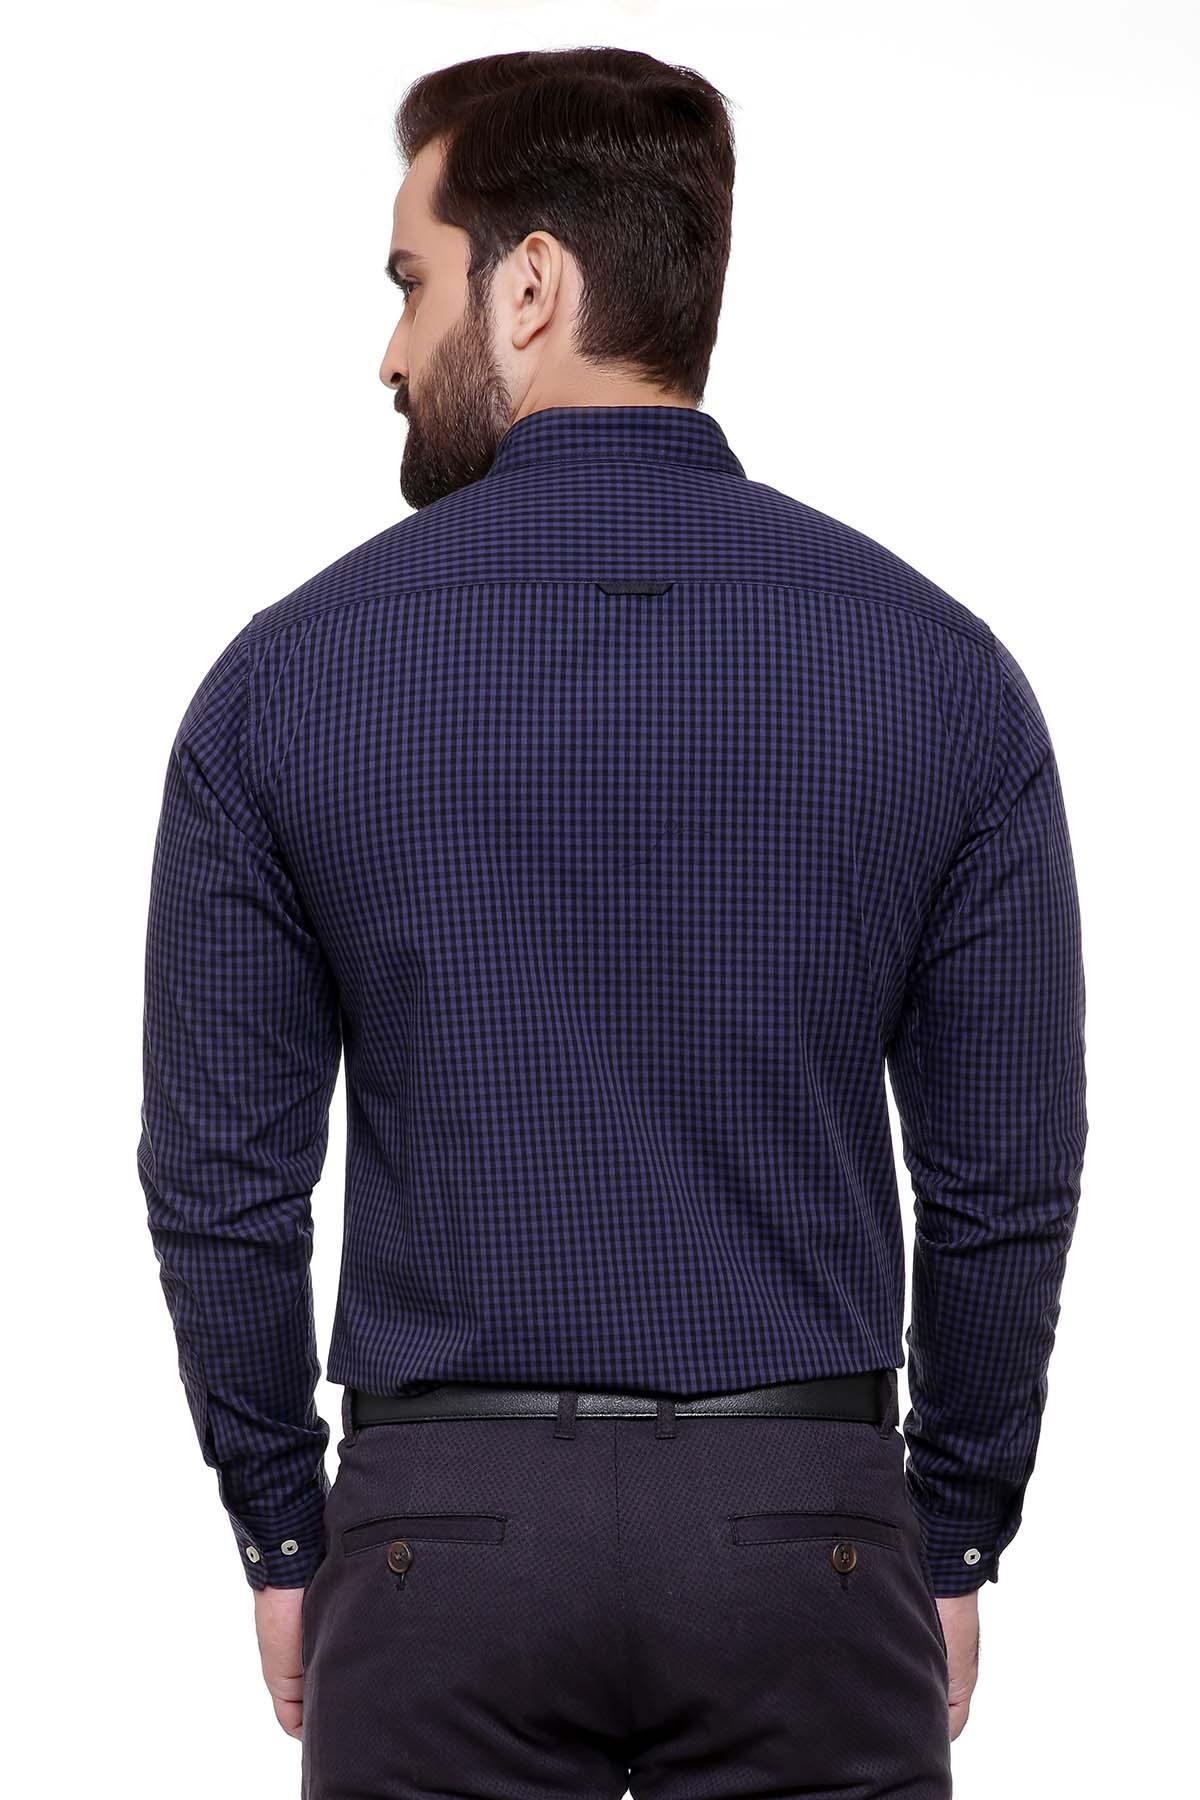 CASUAL SHIRT FULL SLEEVE BLUE BLACK CHECK SLIM FIT at Charcoal Clothing